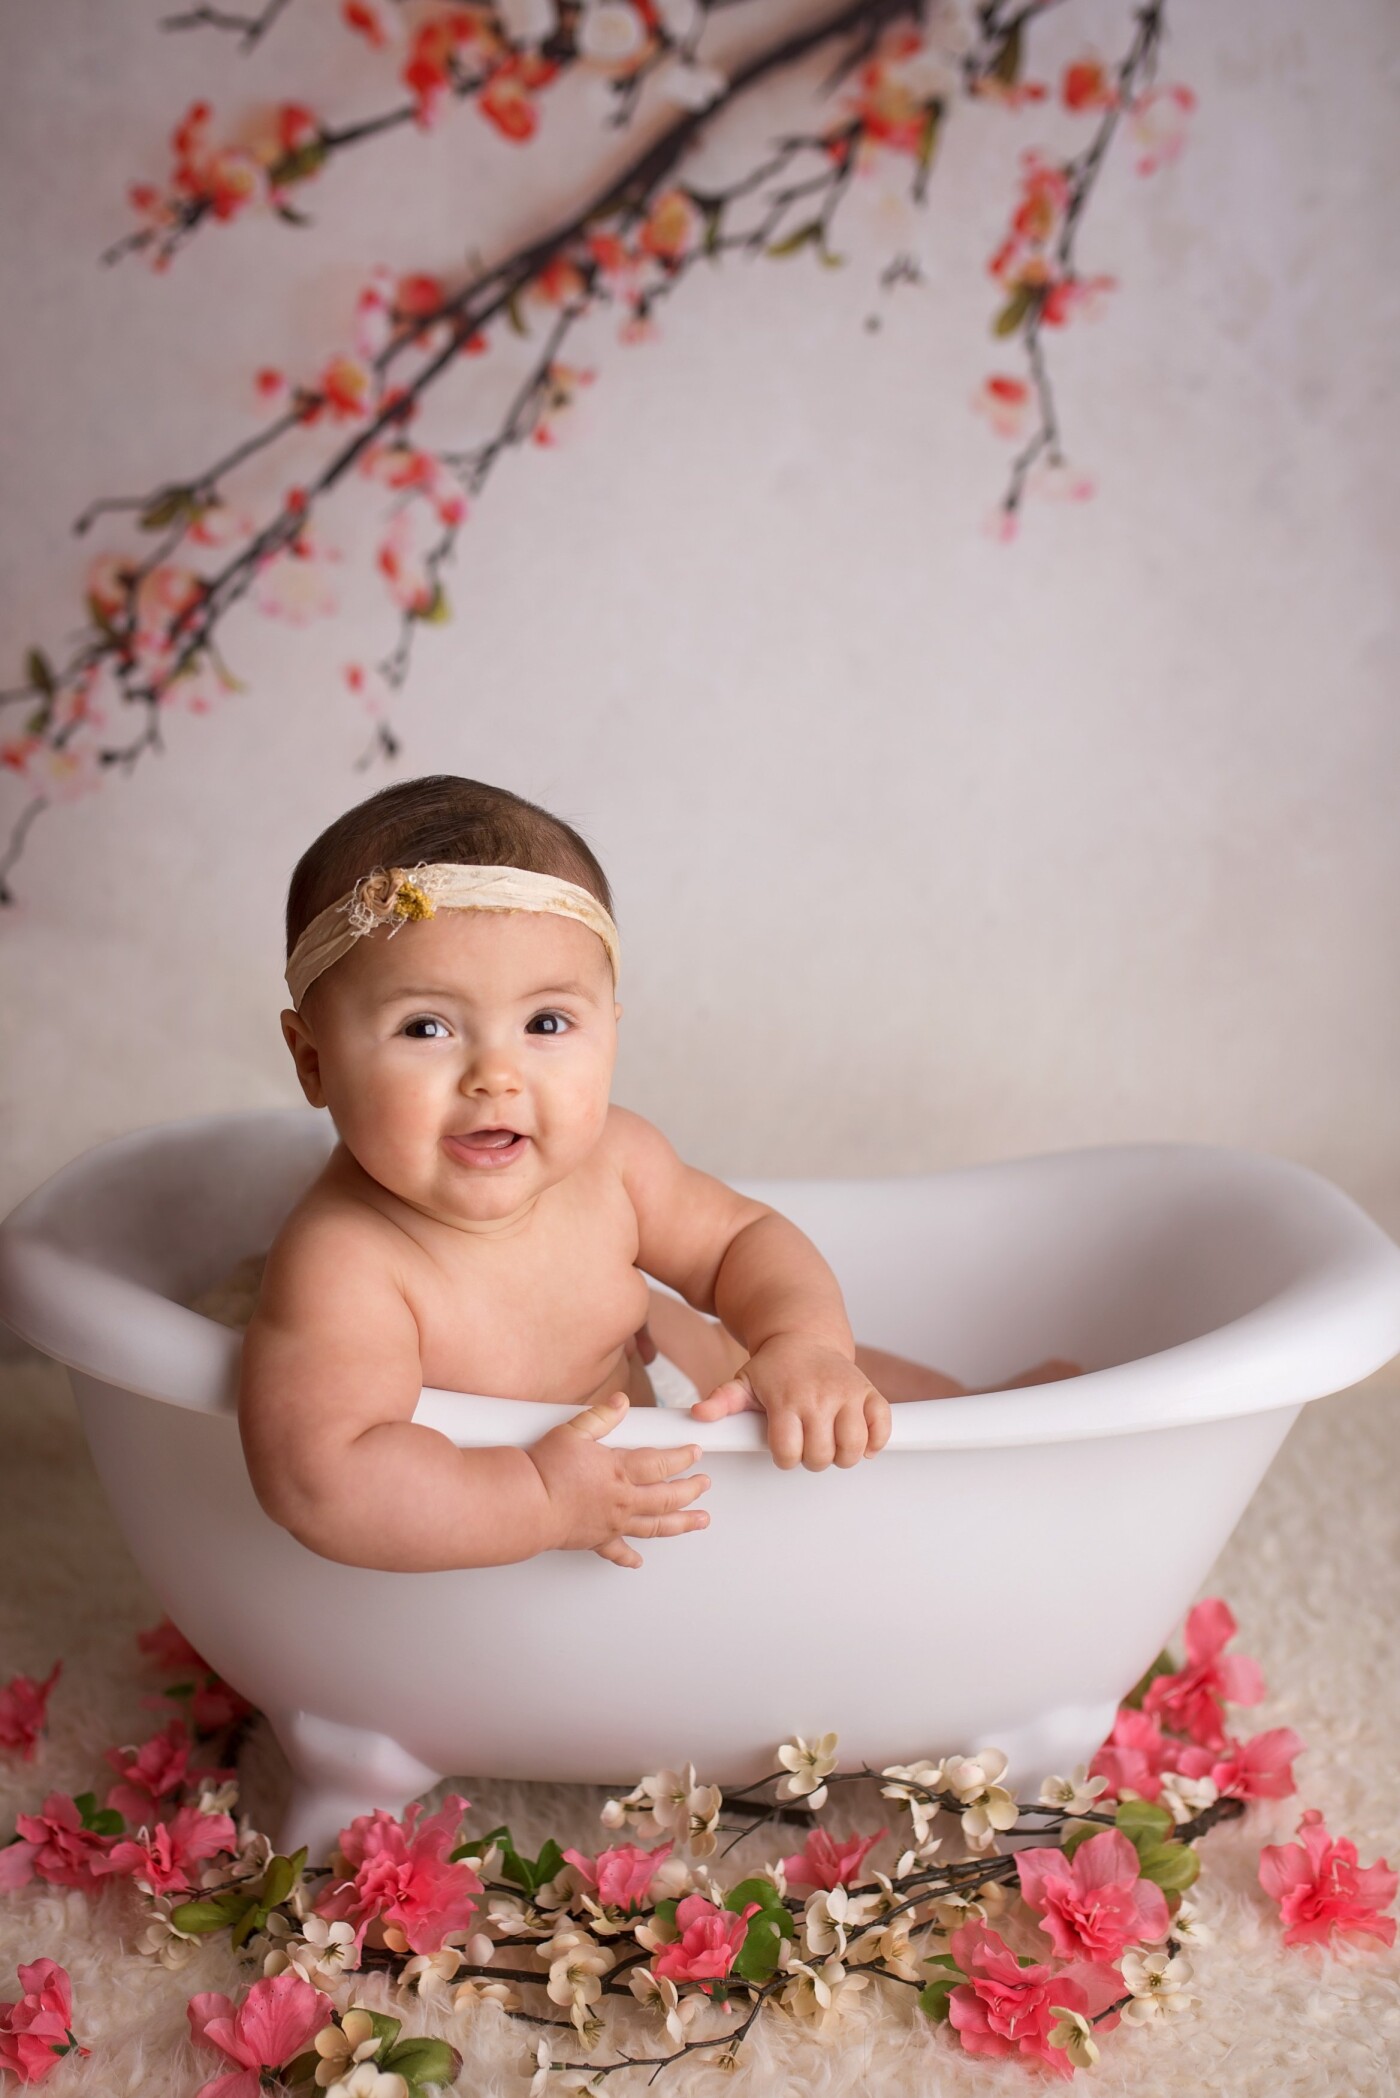 Jayedis is in one of my favorite props to use.  There are a variety of ways to style this little tub.  For little girls, I love the floral arrangement and her parents loved it as well.